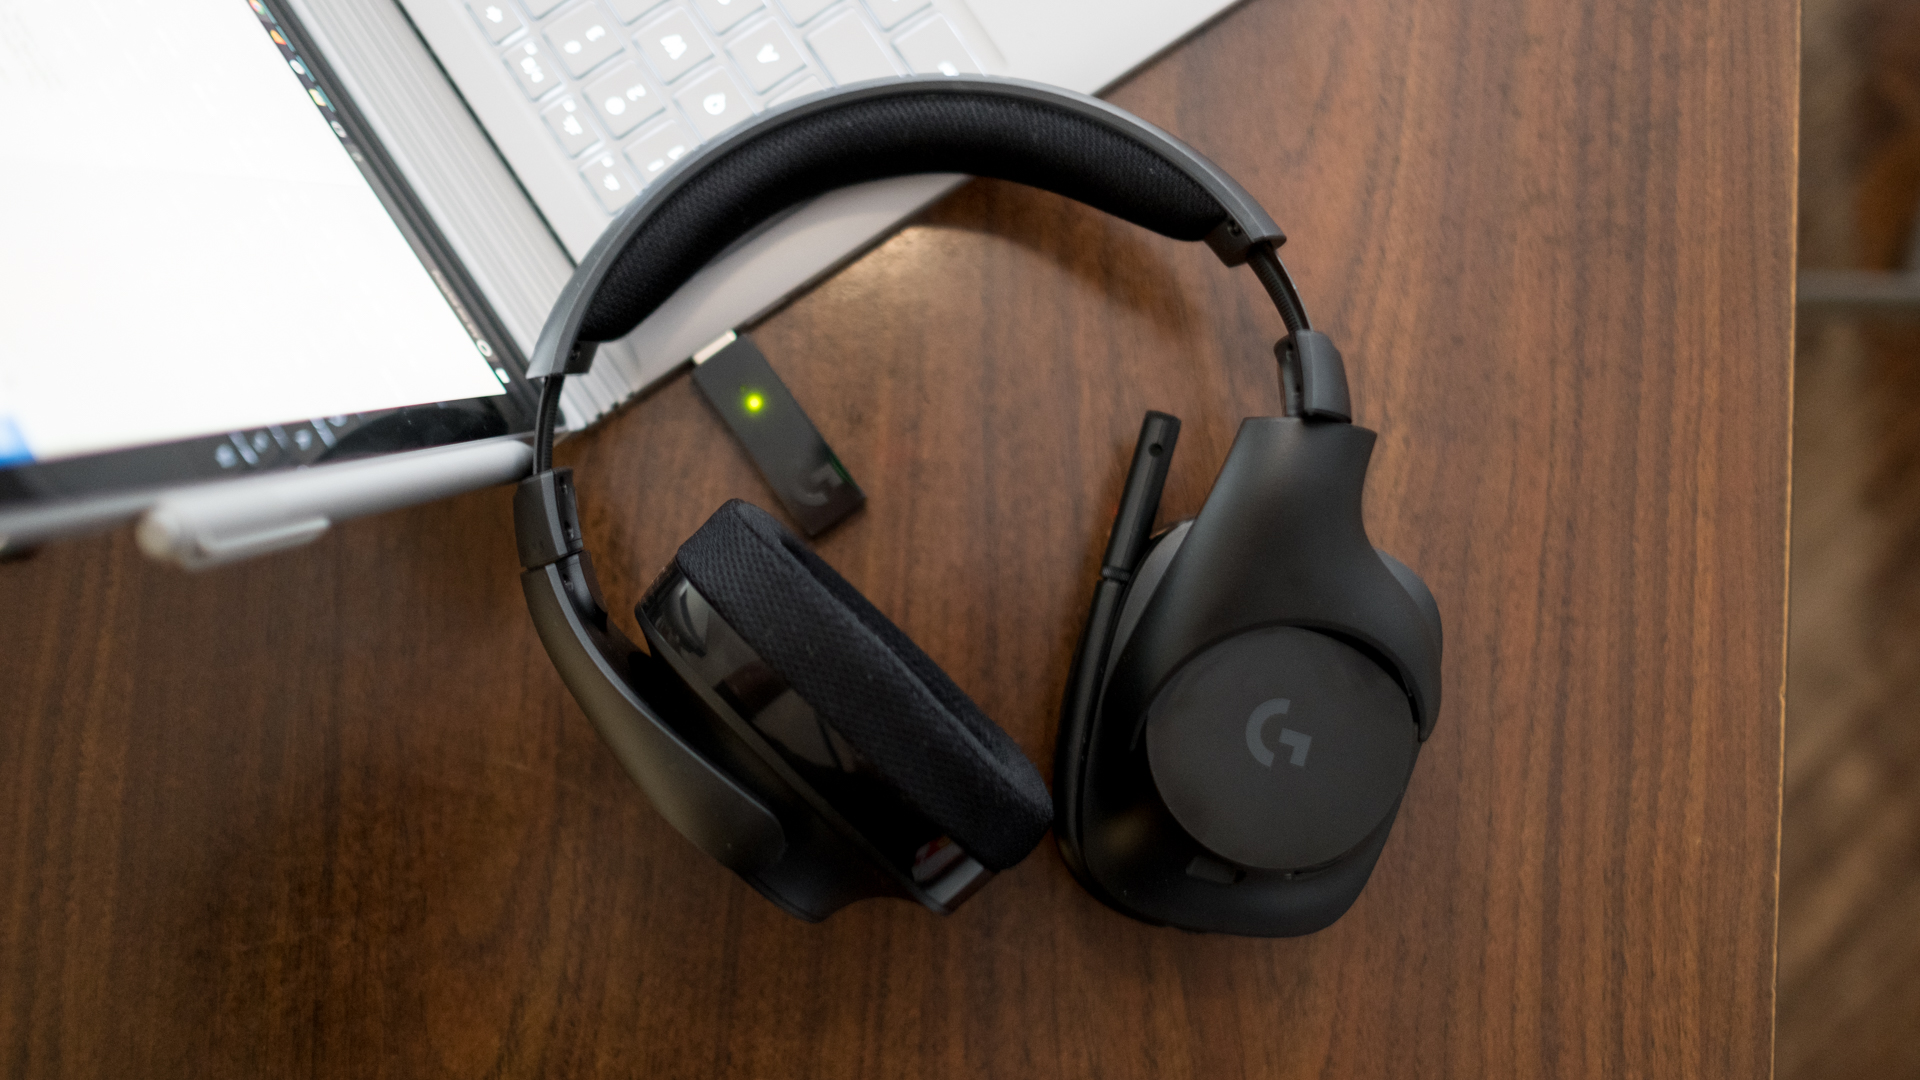 Logitech G533 Review: One of the Better-sounding Wireless Gaming Headsets